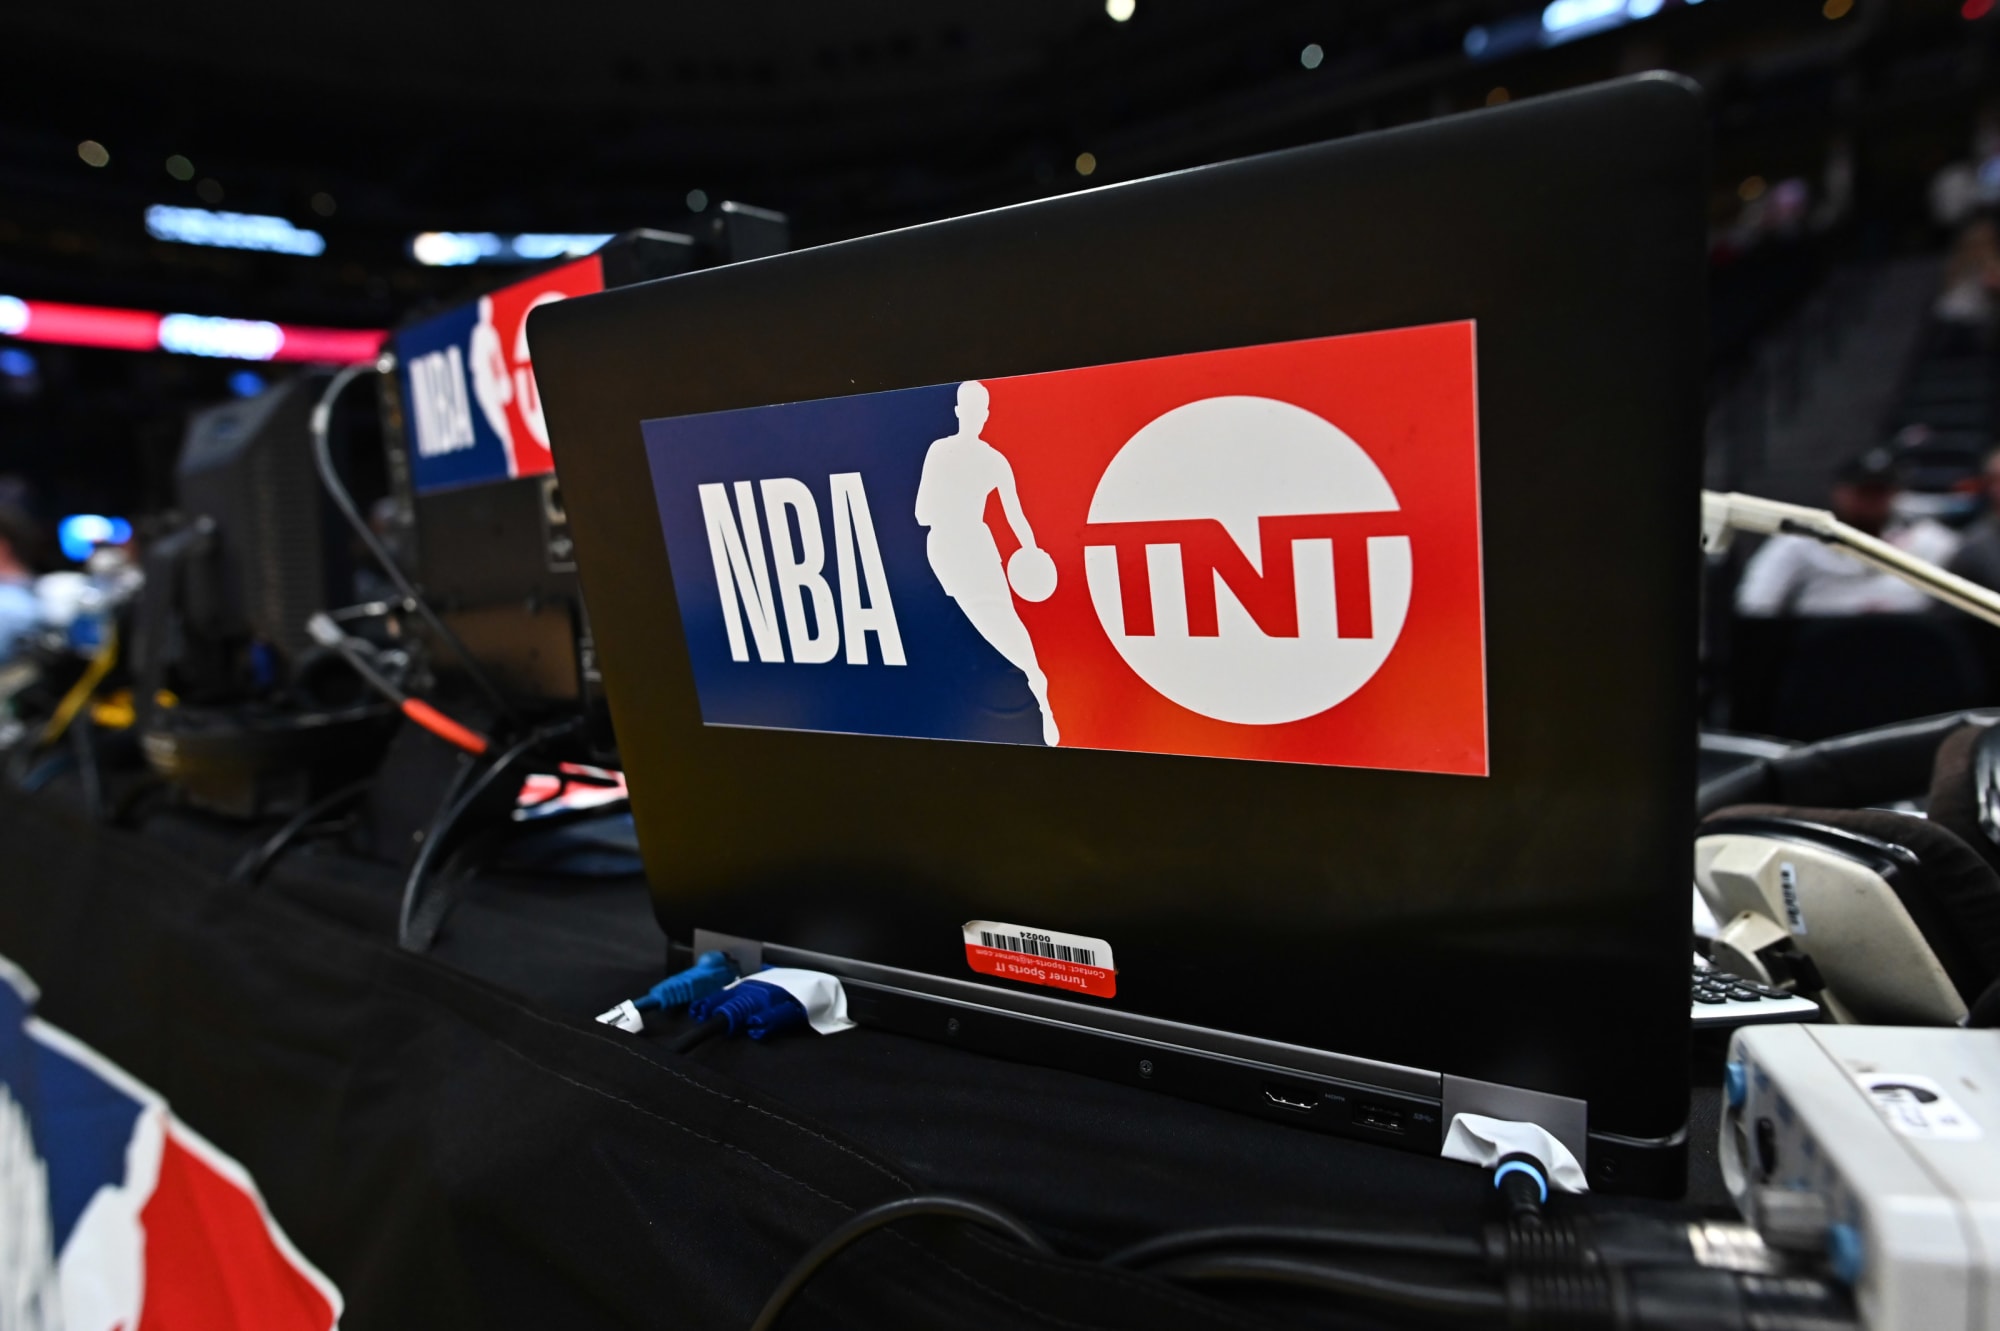 NBA Playoffs Is TNT included on a Fubo TV subscription?